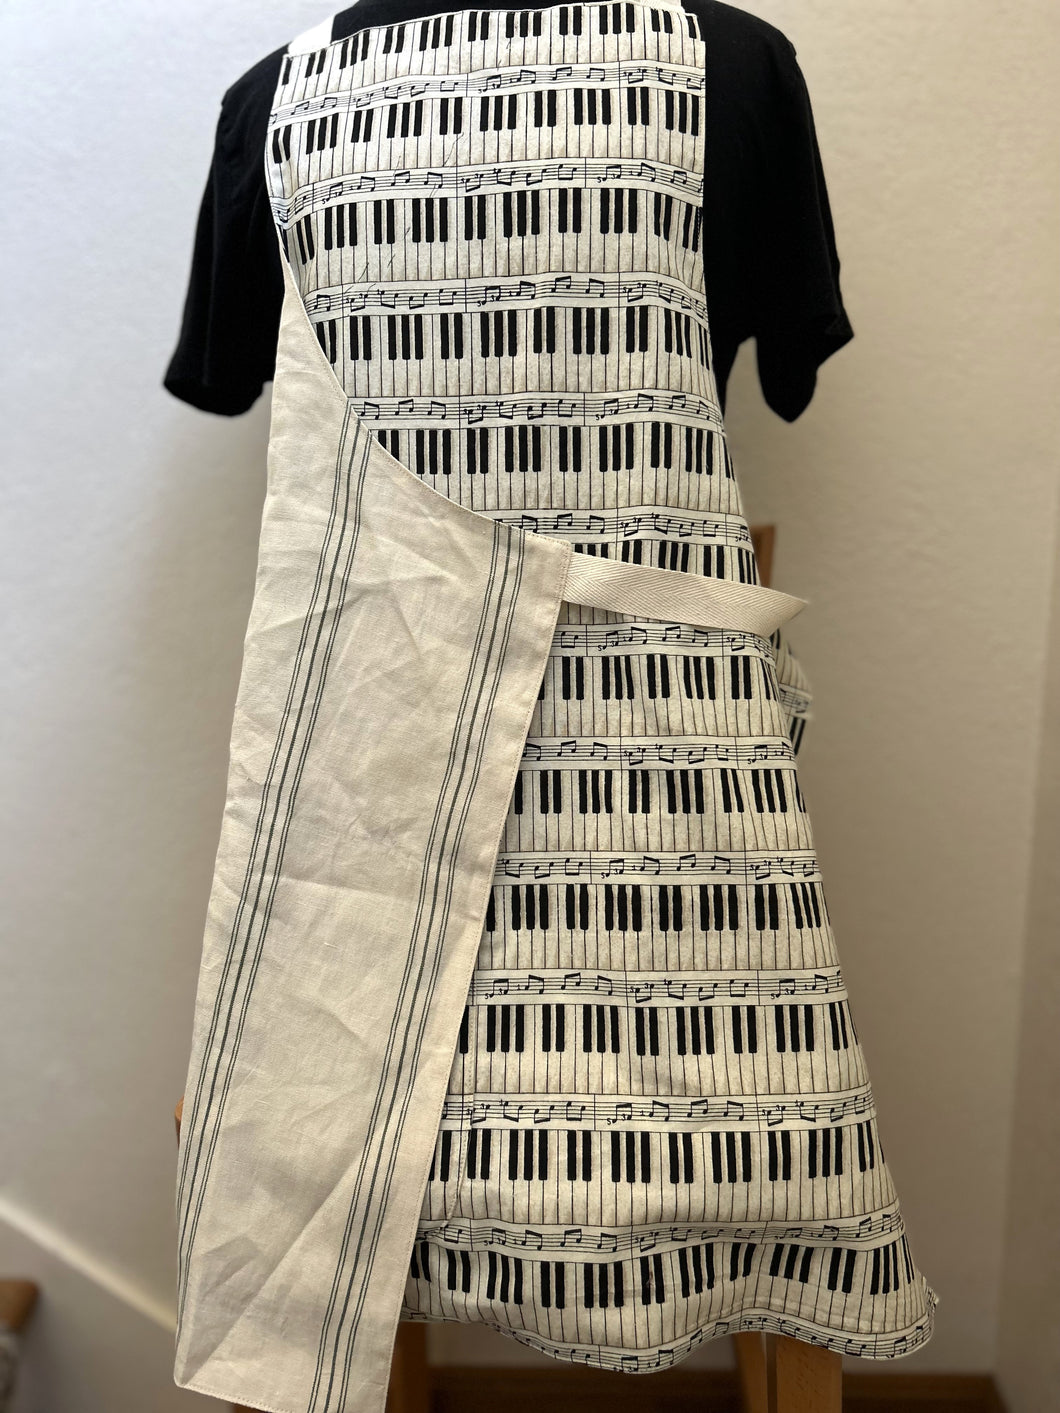 Musical Instruments – Symphony Orchestra and Band – Varied Prints - Adult and Child Aprons